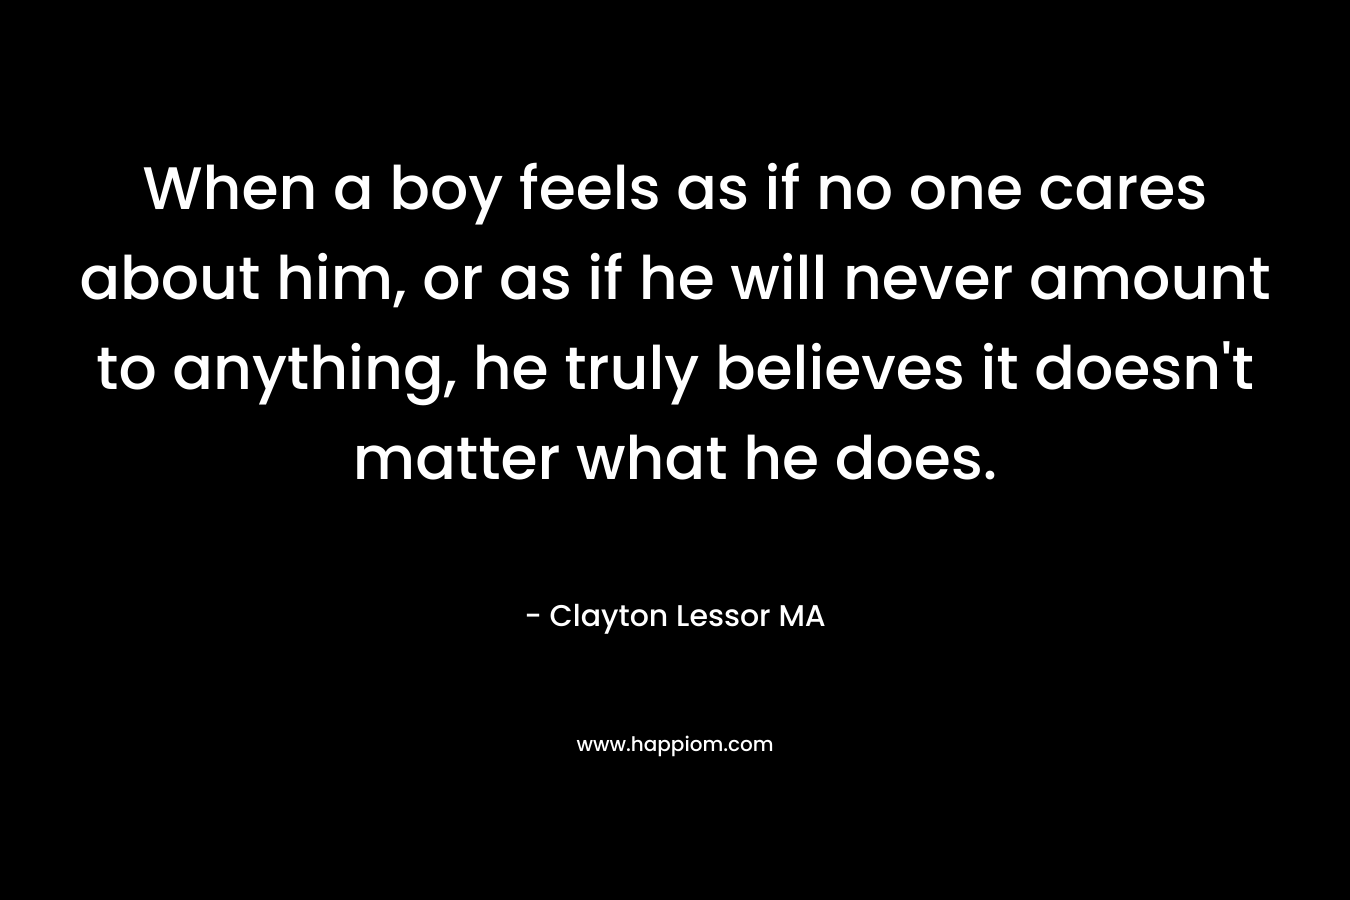 When a boy feels as if no one cares about him, or as if he will never amount to anything, he truly believes it doesn’t matter what he does. – Clayton Lessor MA